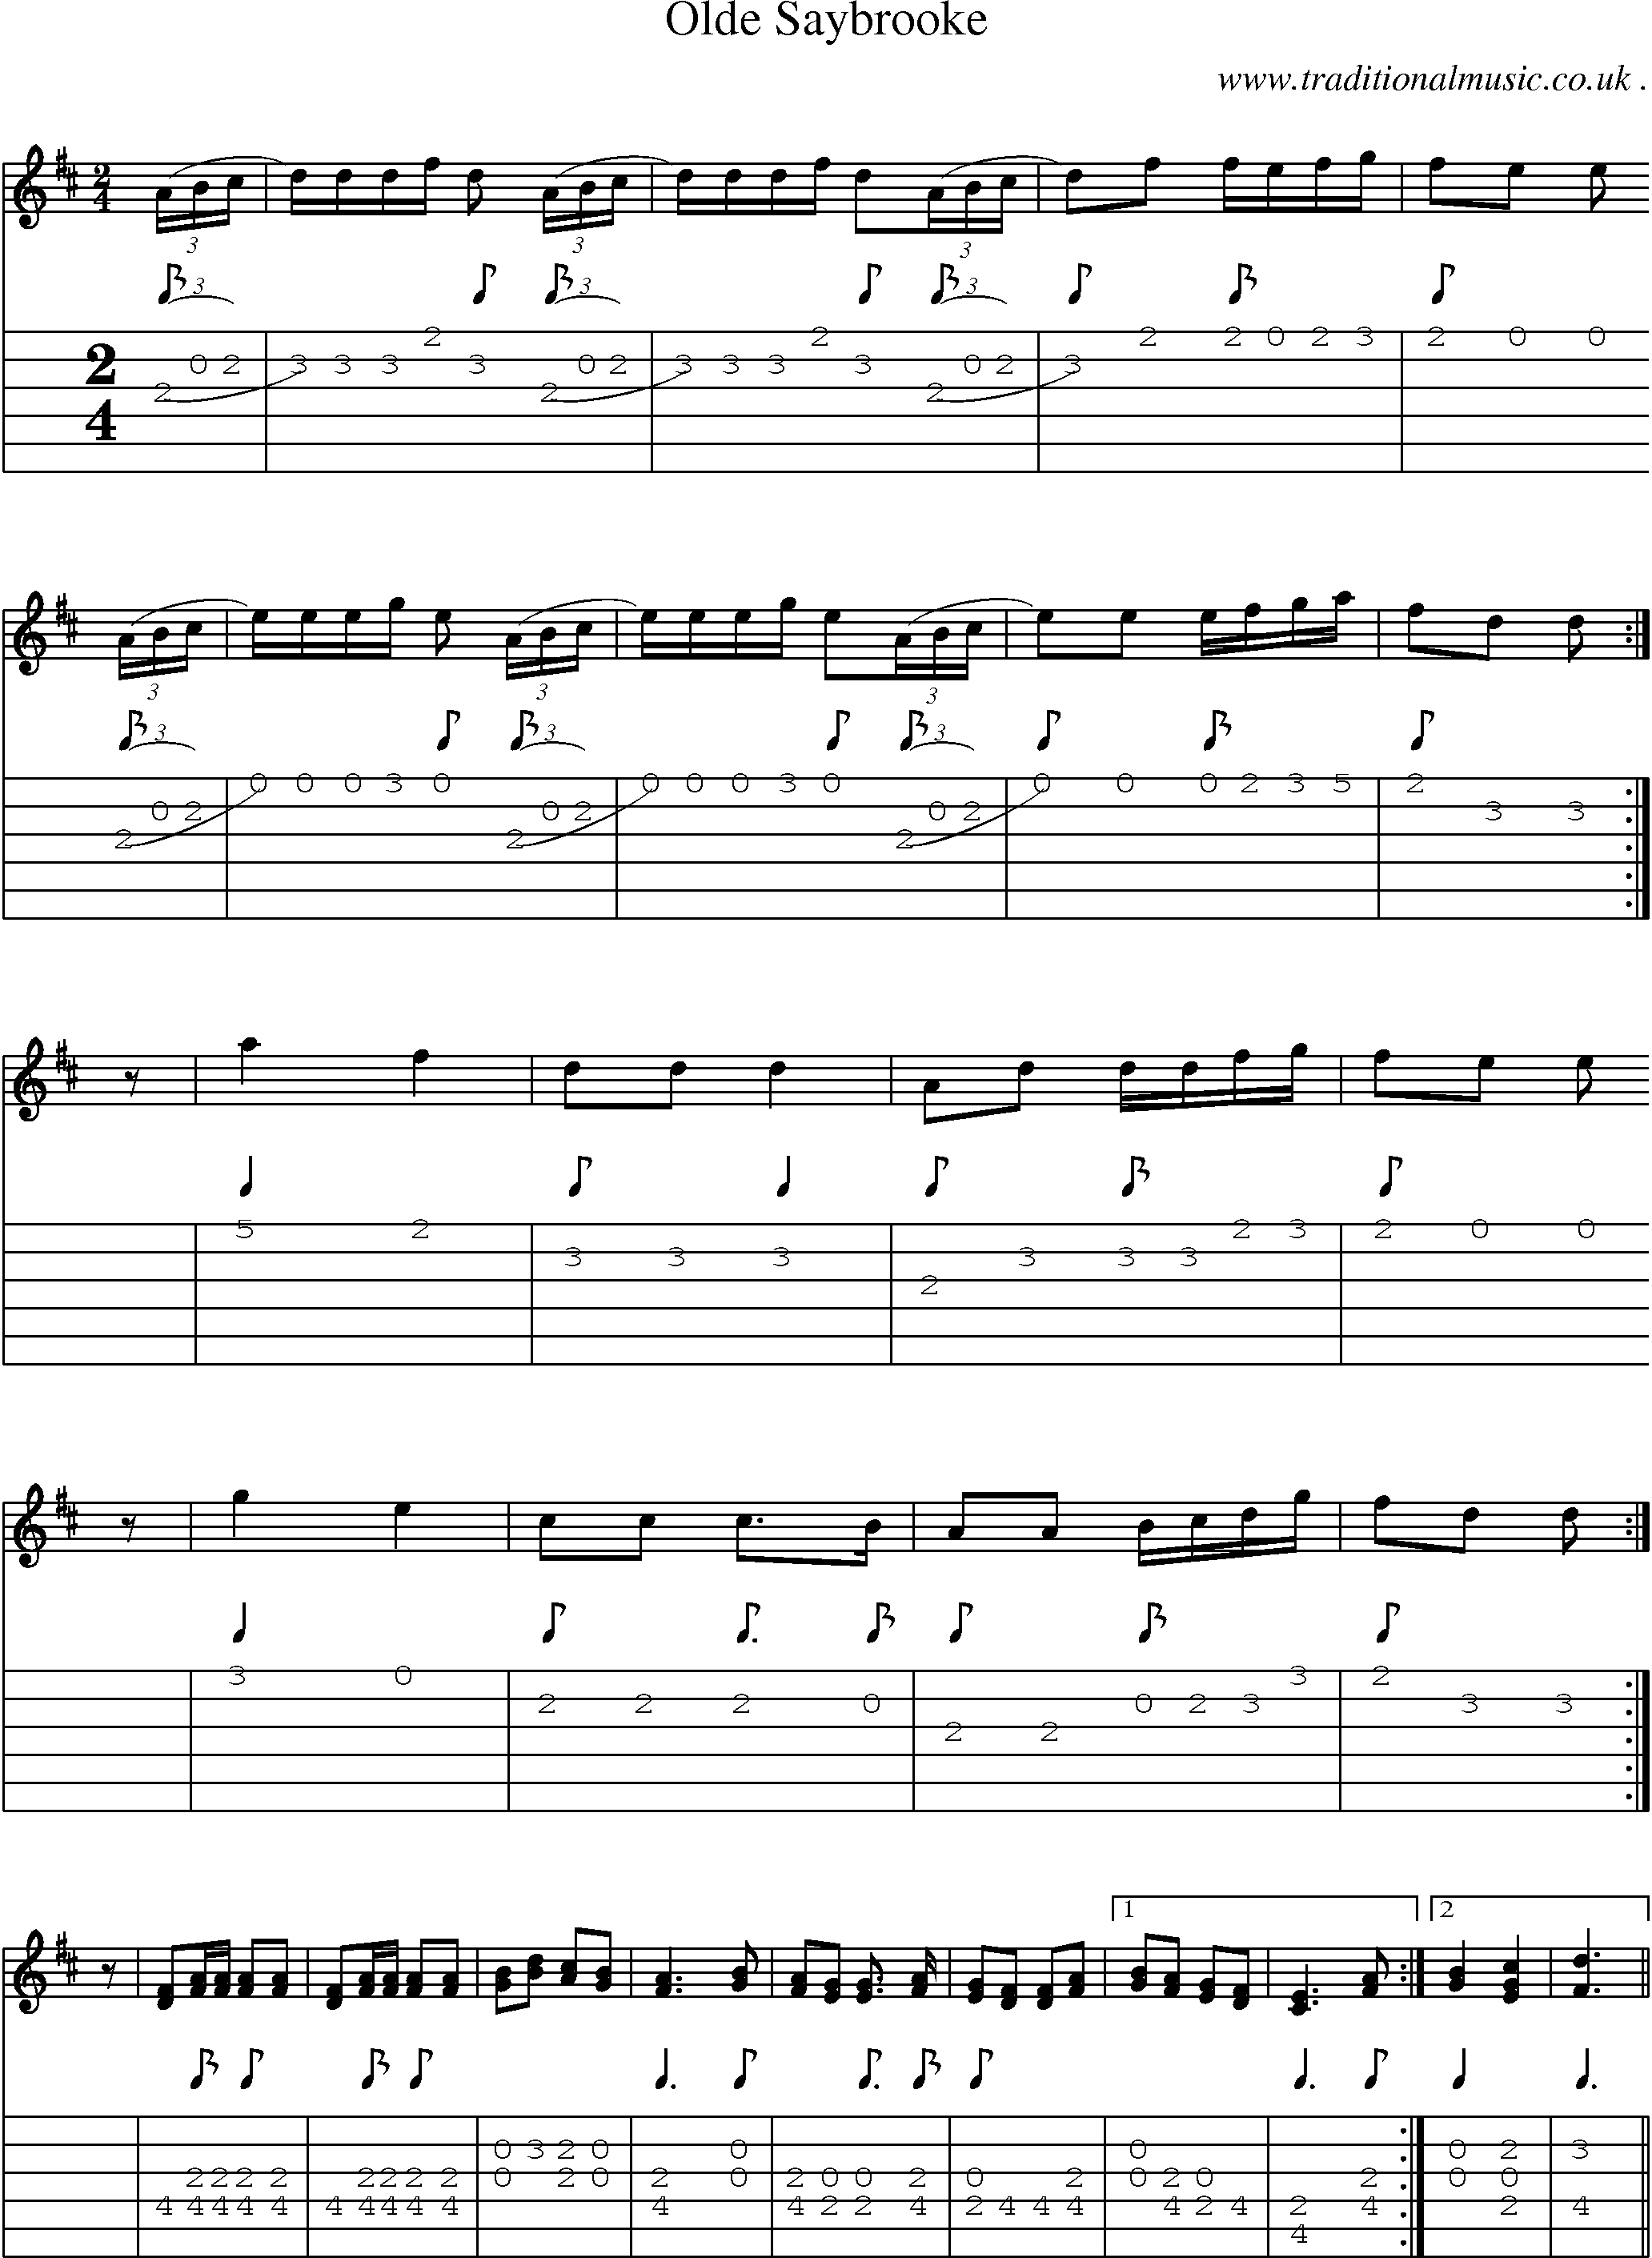 Sheet-Music and Guitar Tabs for Olde Saybrooke